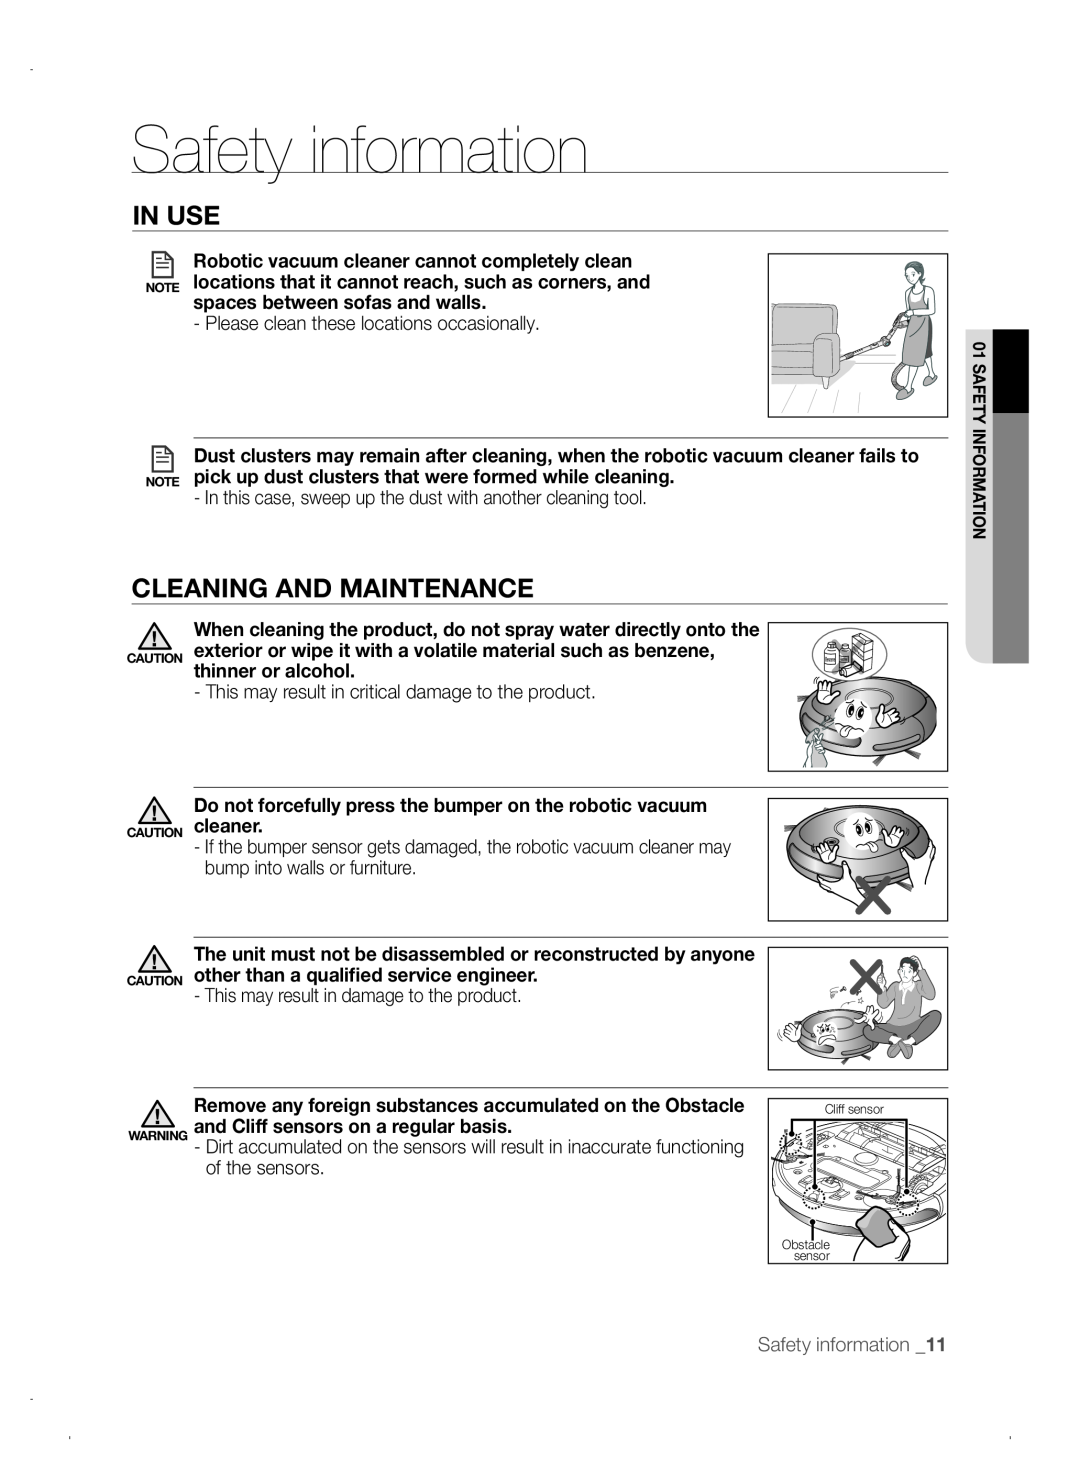 Samsung VCR8845T3A/XEO manual Cleaning and Maintenance, Safety information, In use, spaces between sofas and walls 